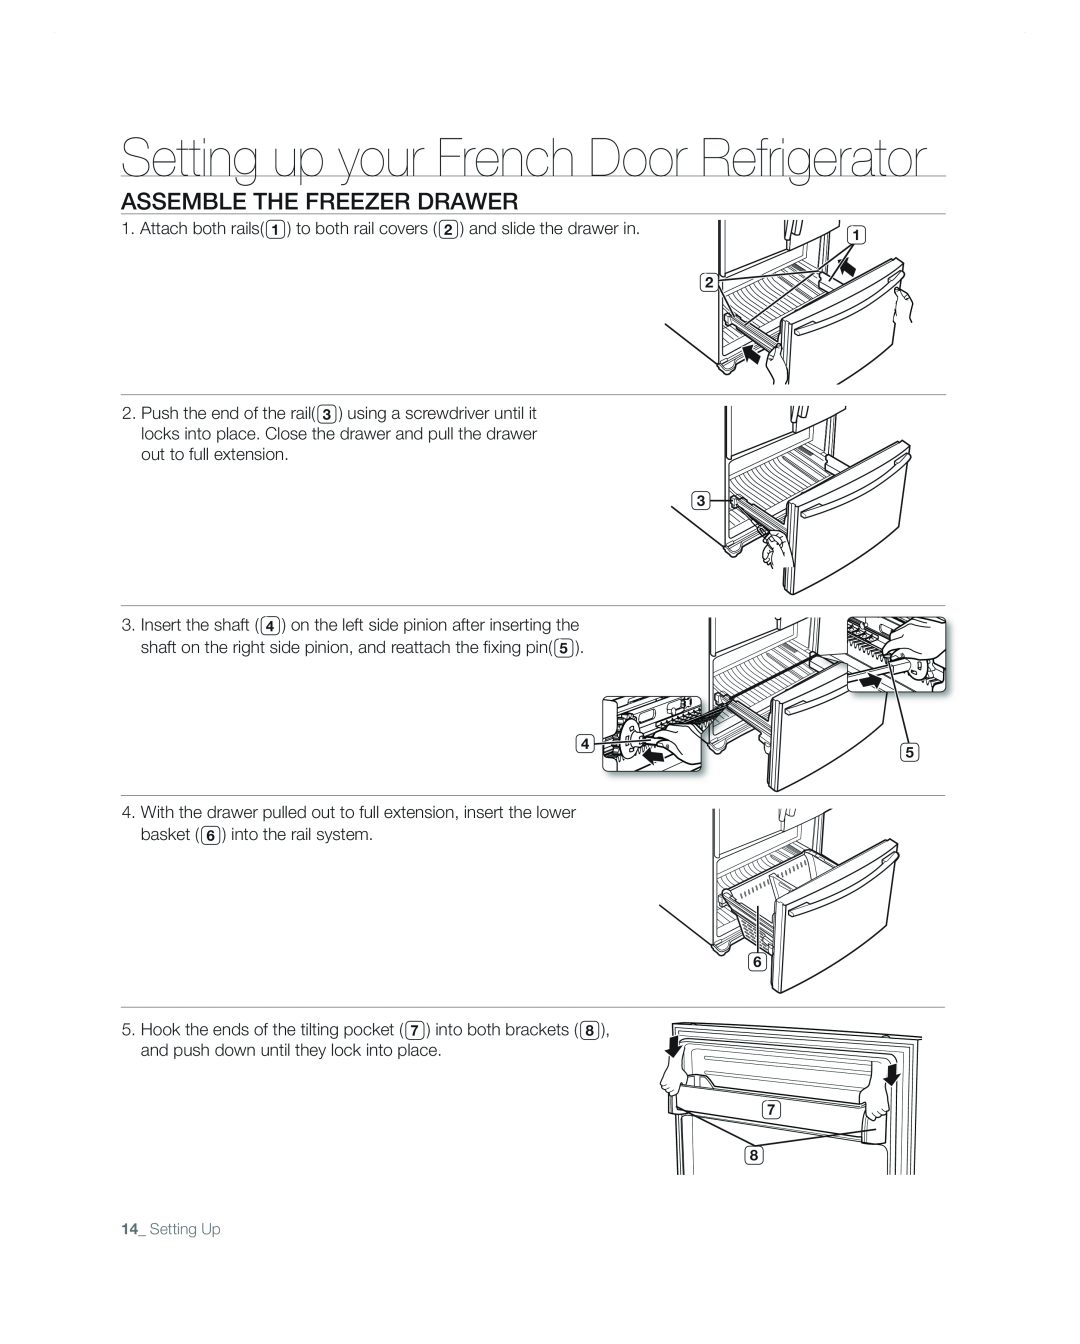 Samsung RF267AA user manual assemble the freezer drawer, Attach both rails, to both rail covers, and slide the drawer in 